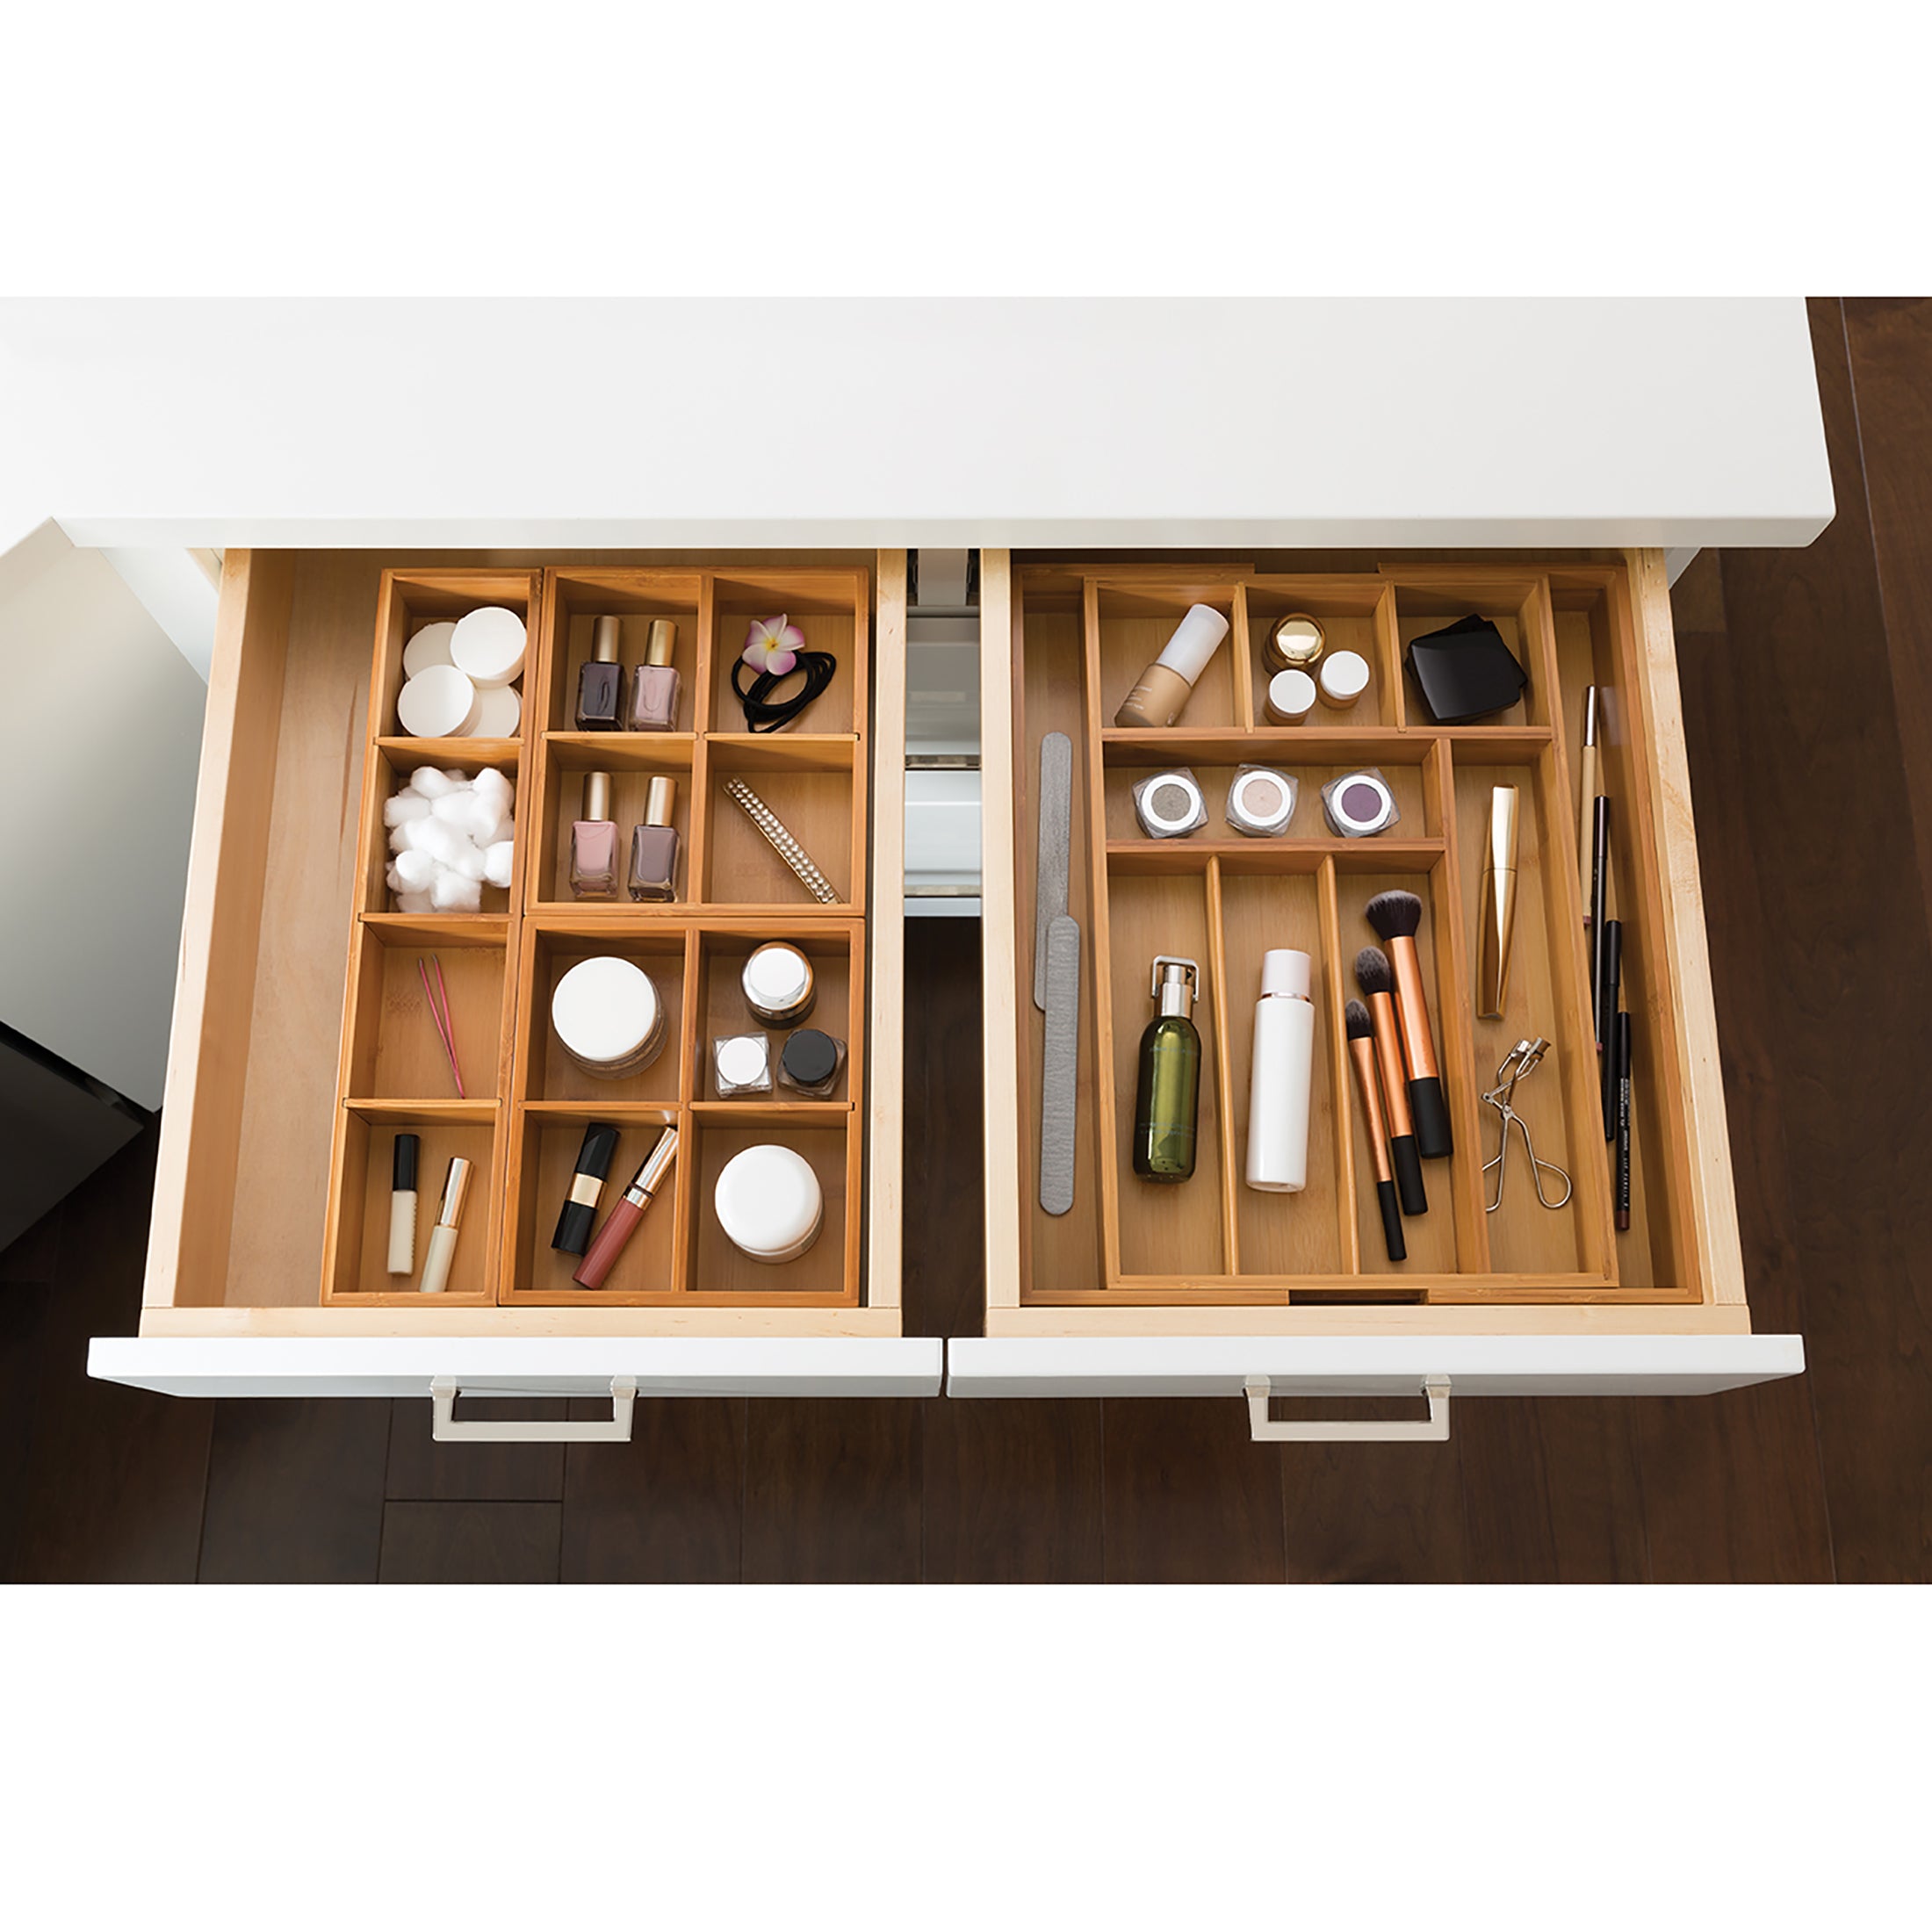 Seville Classics 4-piece Bamboo Expandable Drawer Organizer